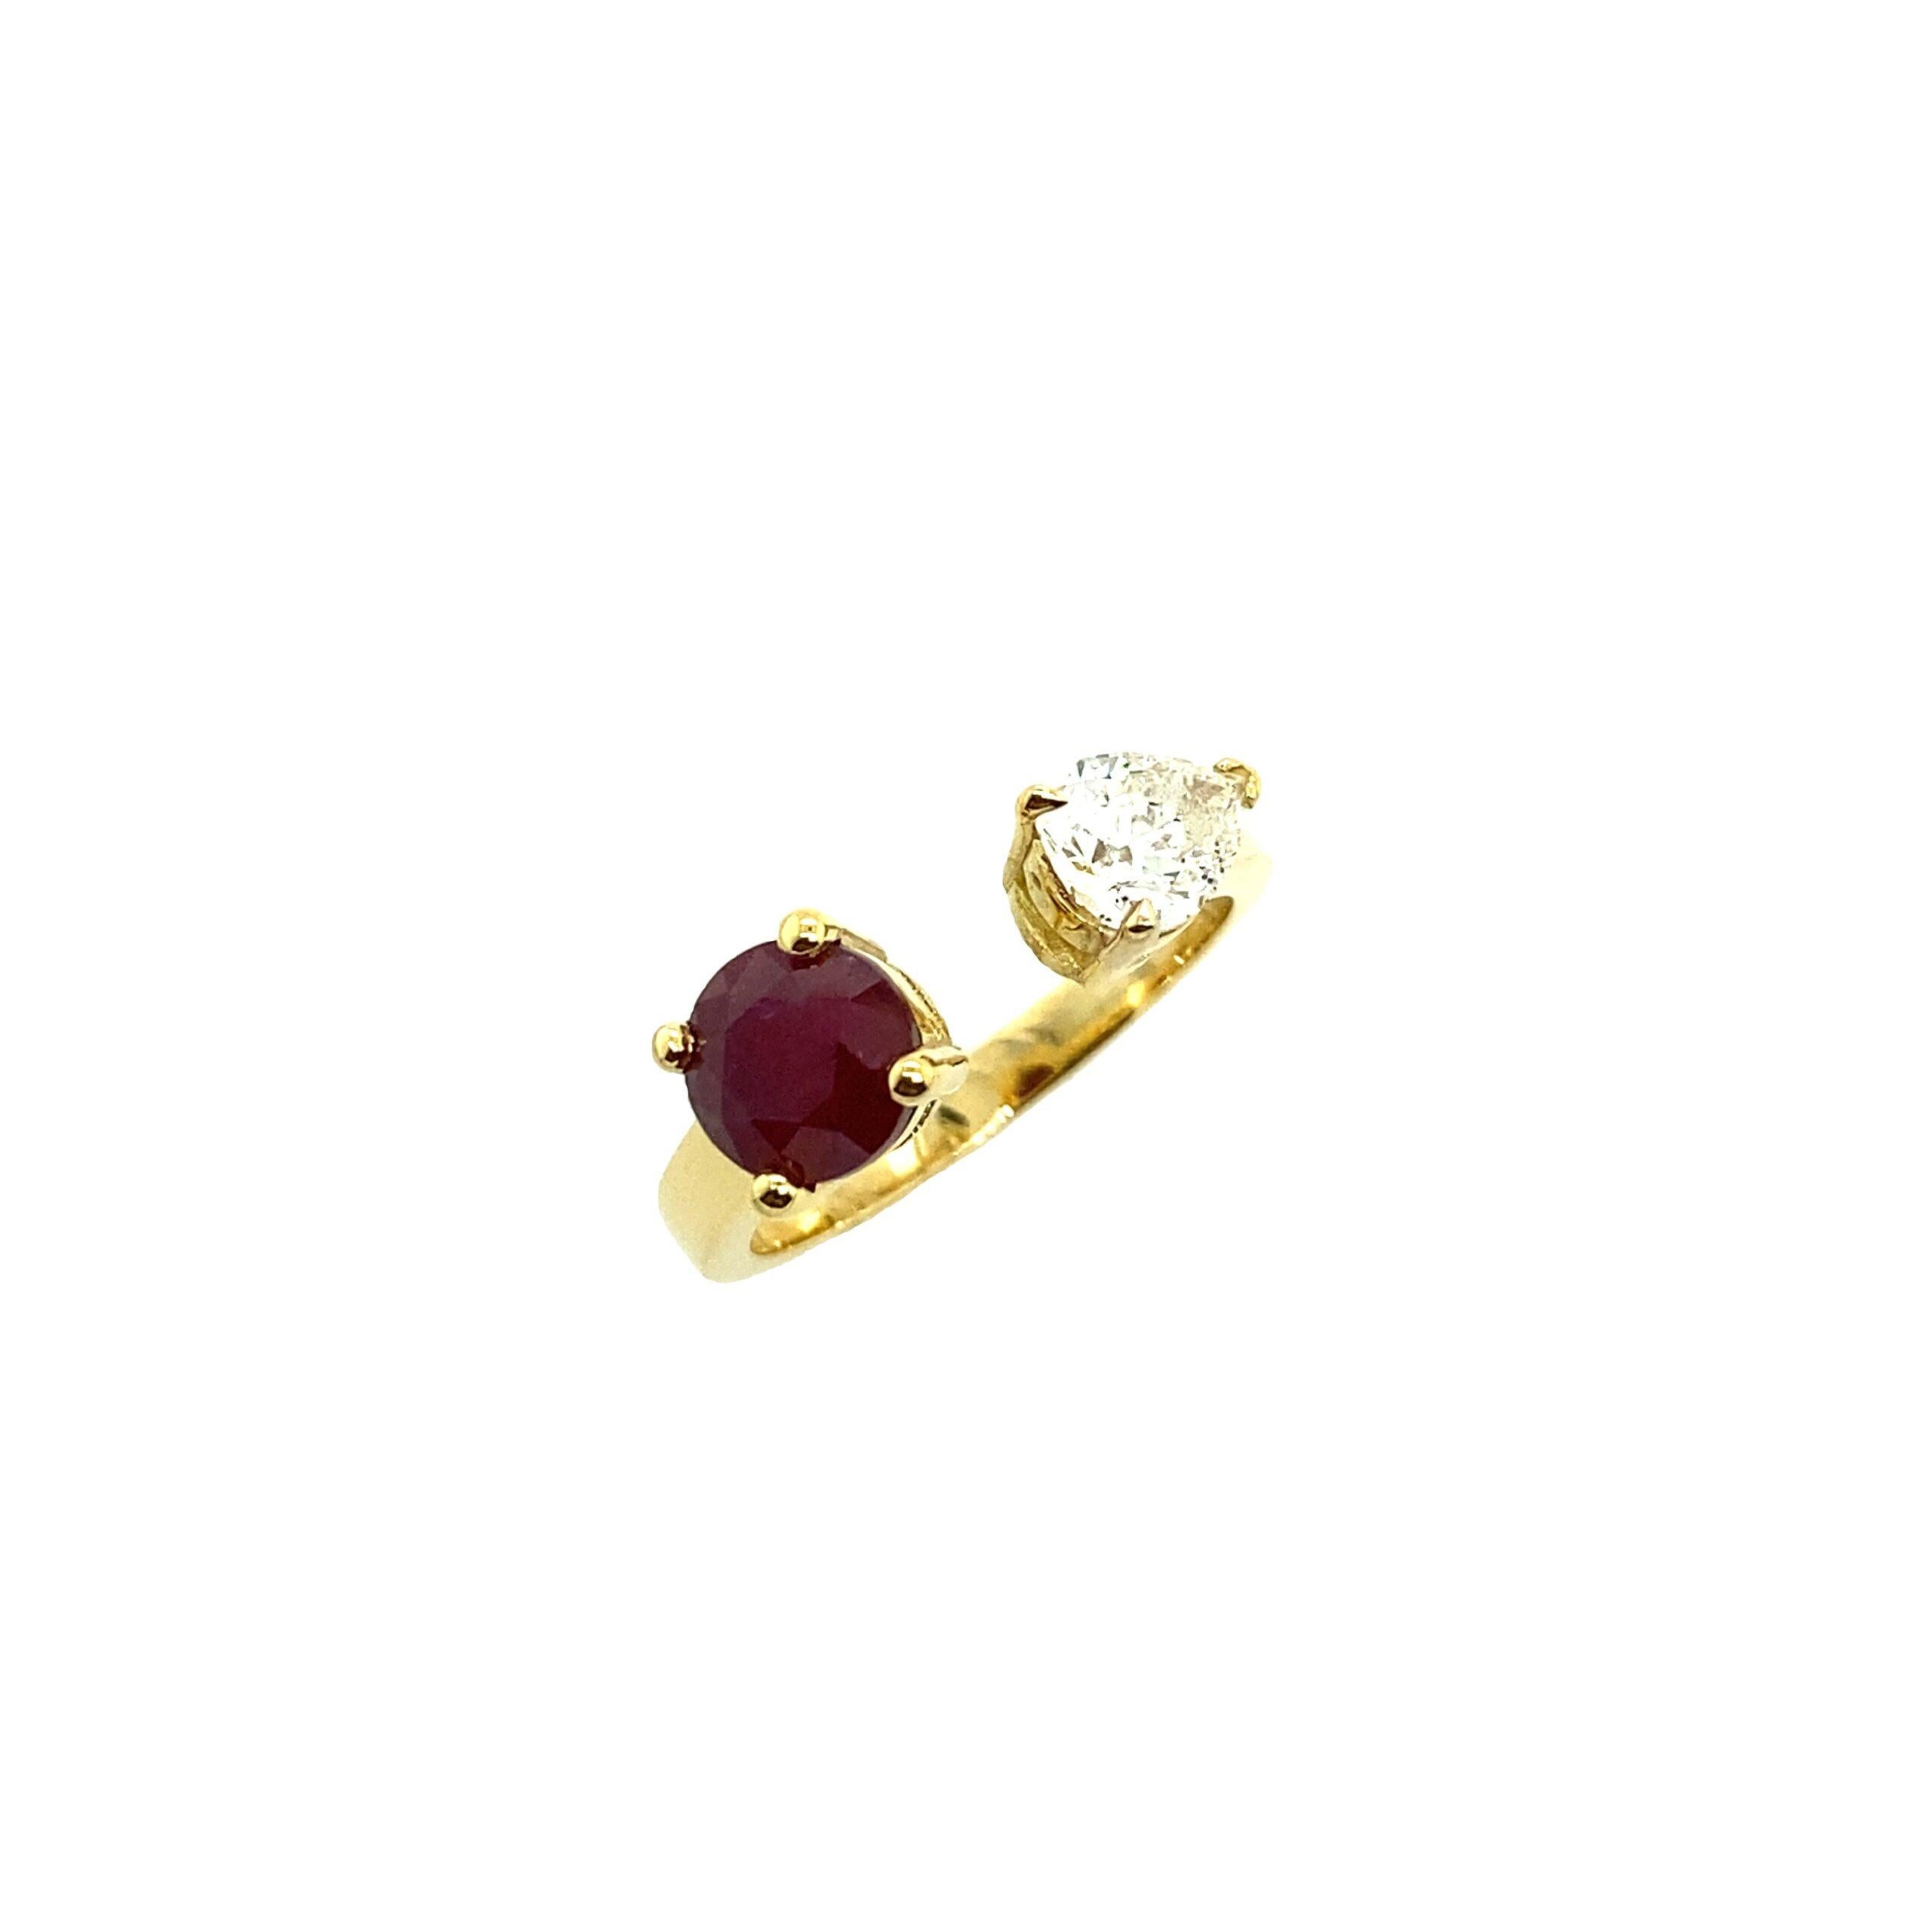 0.69ct G/H/SI Pear Shape Natural Diamond + 1.48ct Round Ruby, Set In 18ct Gold
18ct Yellow Gold Pear Shape Natural Diamond and Natural Round Ruby Ring
The Ruby is a lustrous, deep red stone that has accrued special and symbolic meaning through time.